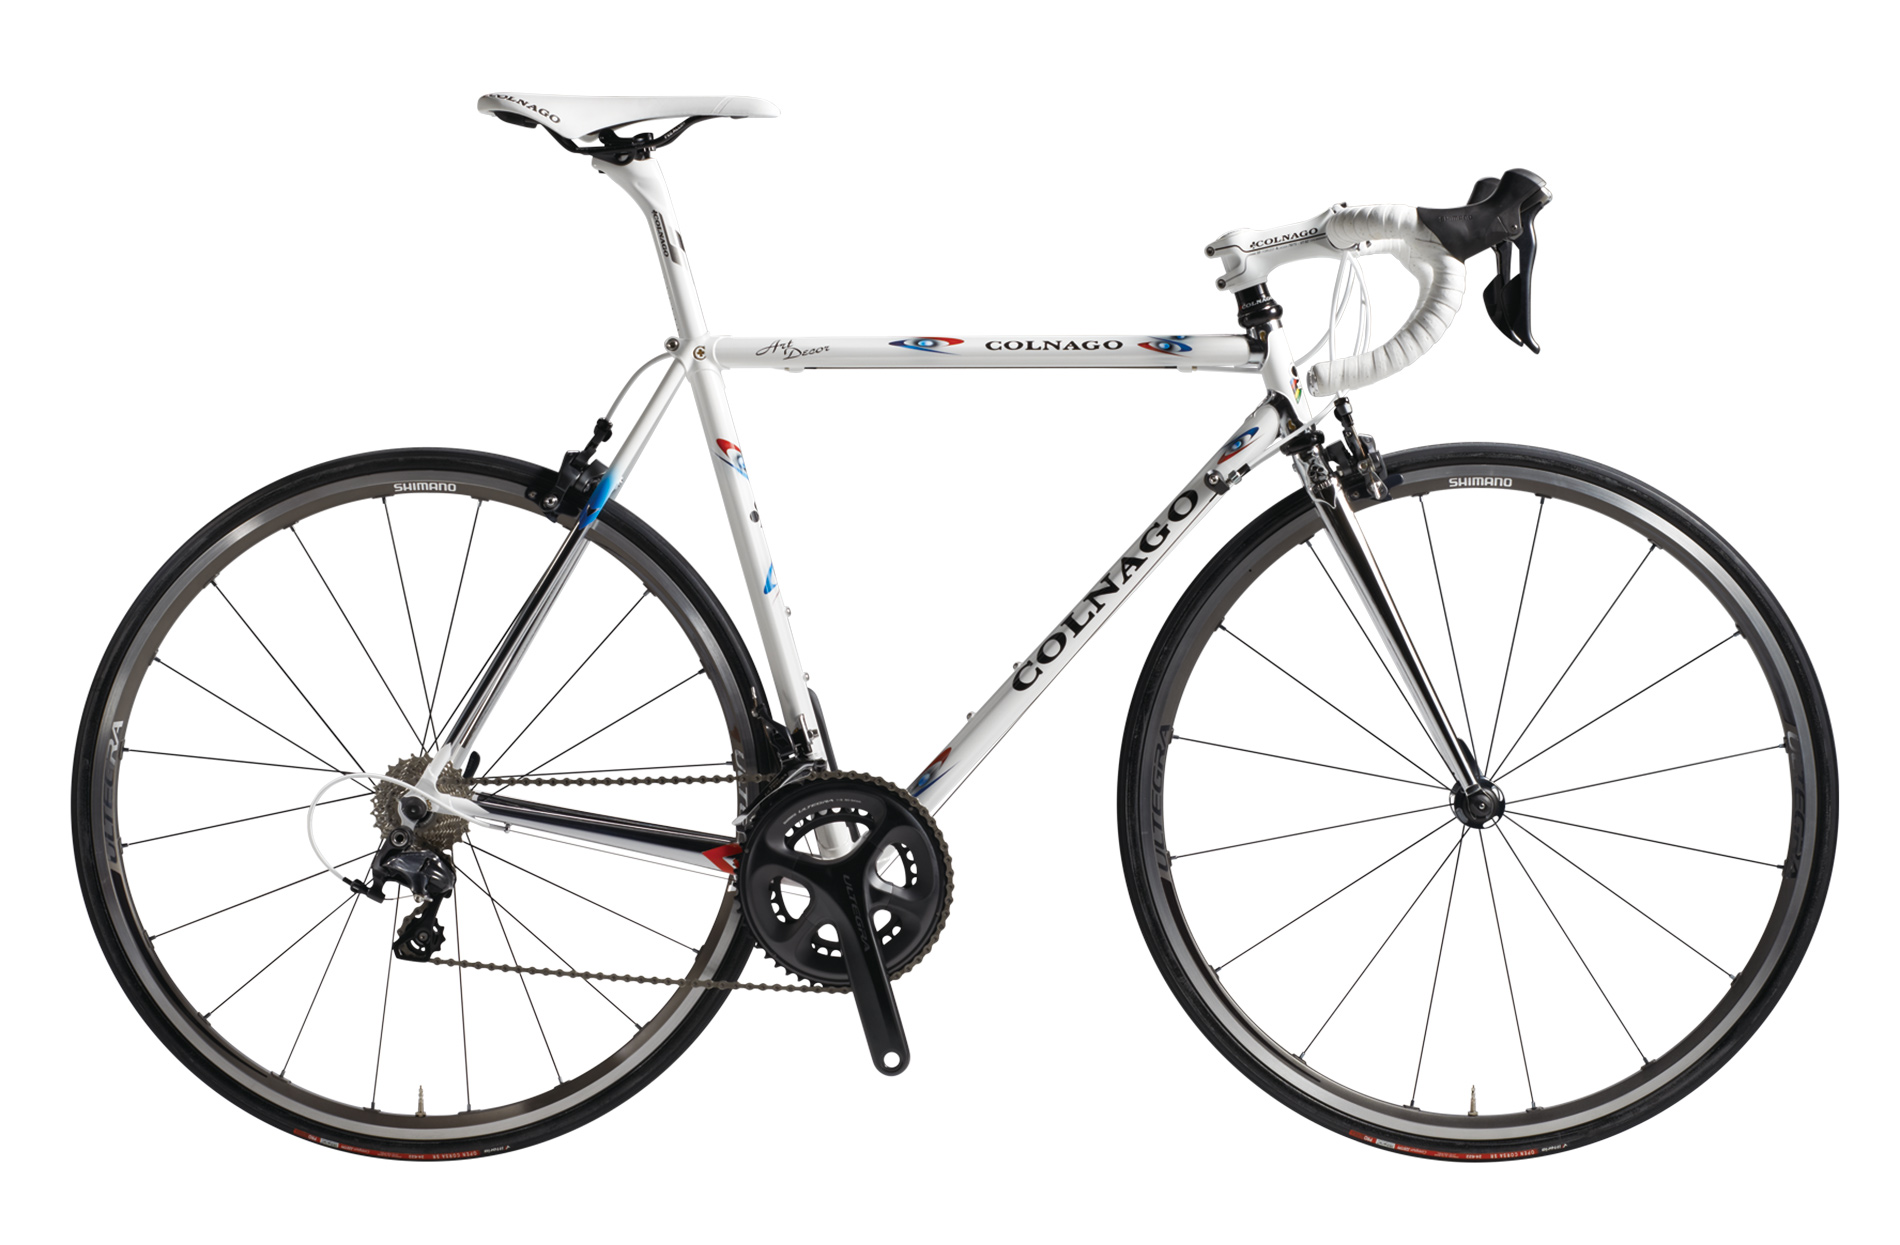 MASTER X-LIGHT | PRODUCTS | COLNAGO